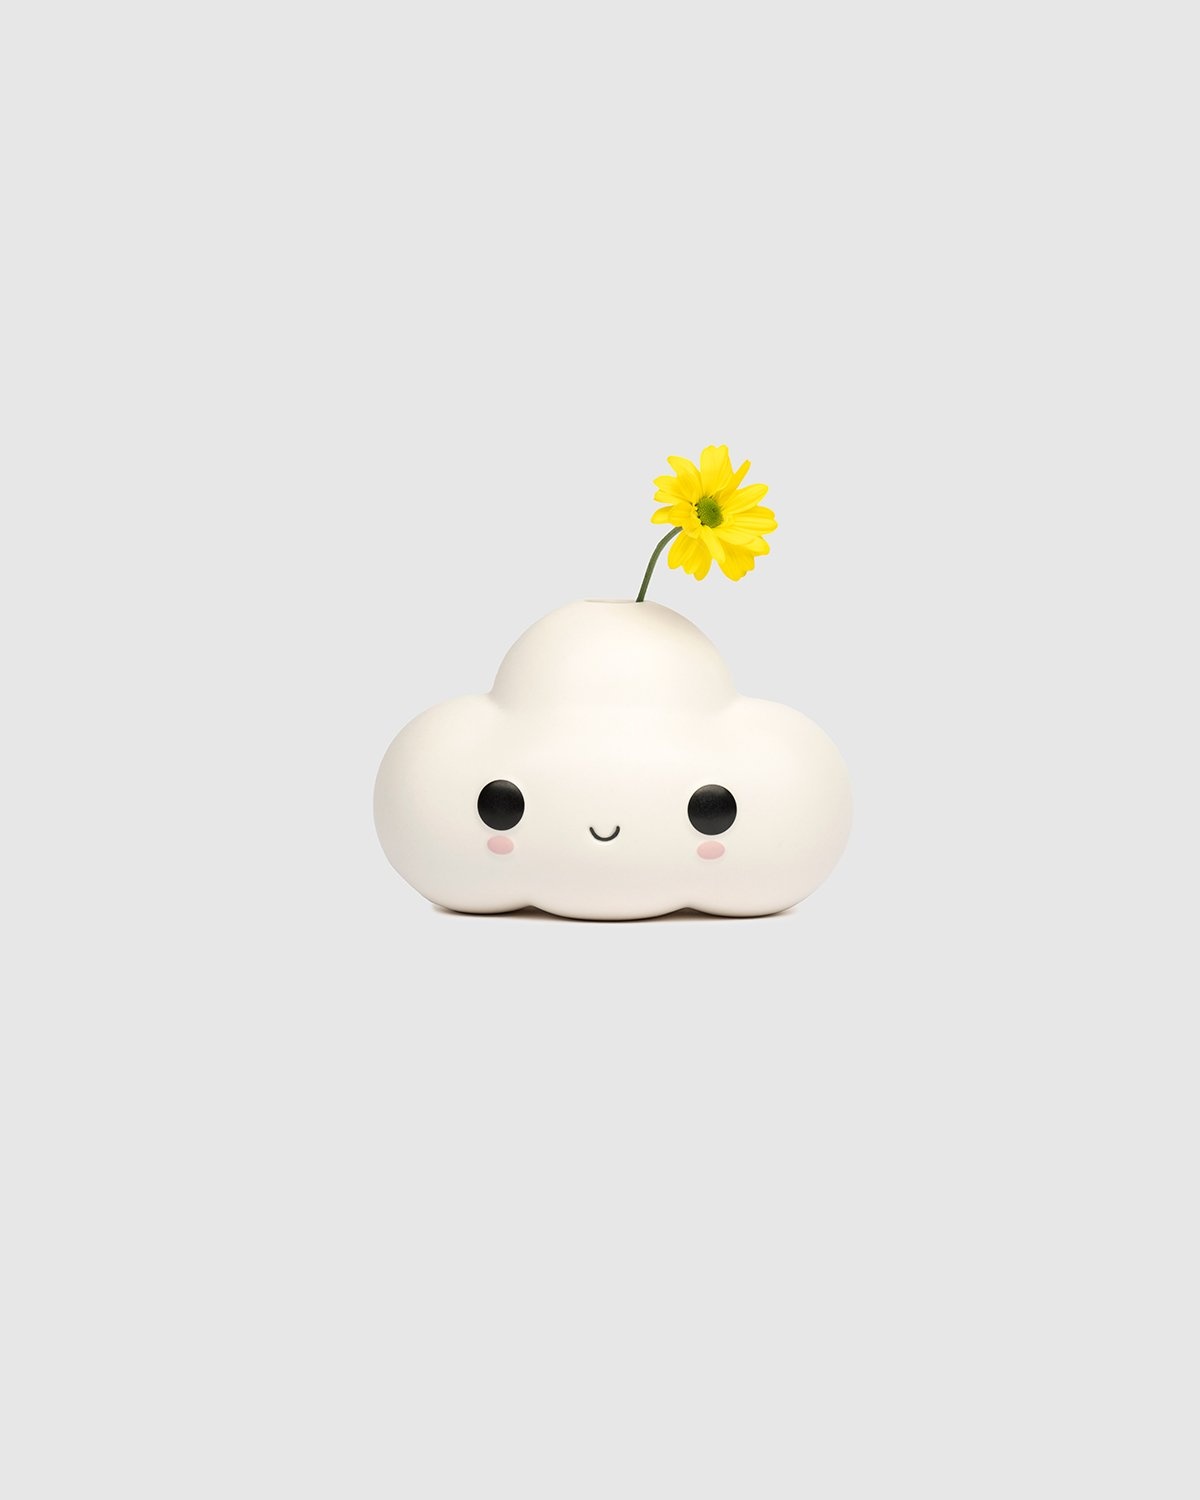 FriendsWithYou – Little Cloud Flower Vase by - Vases - White - Image 4